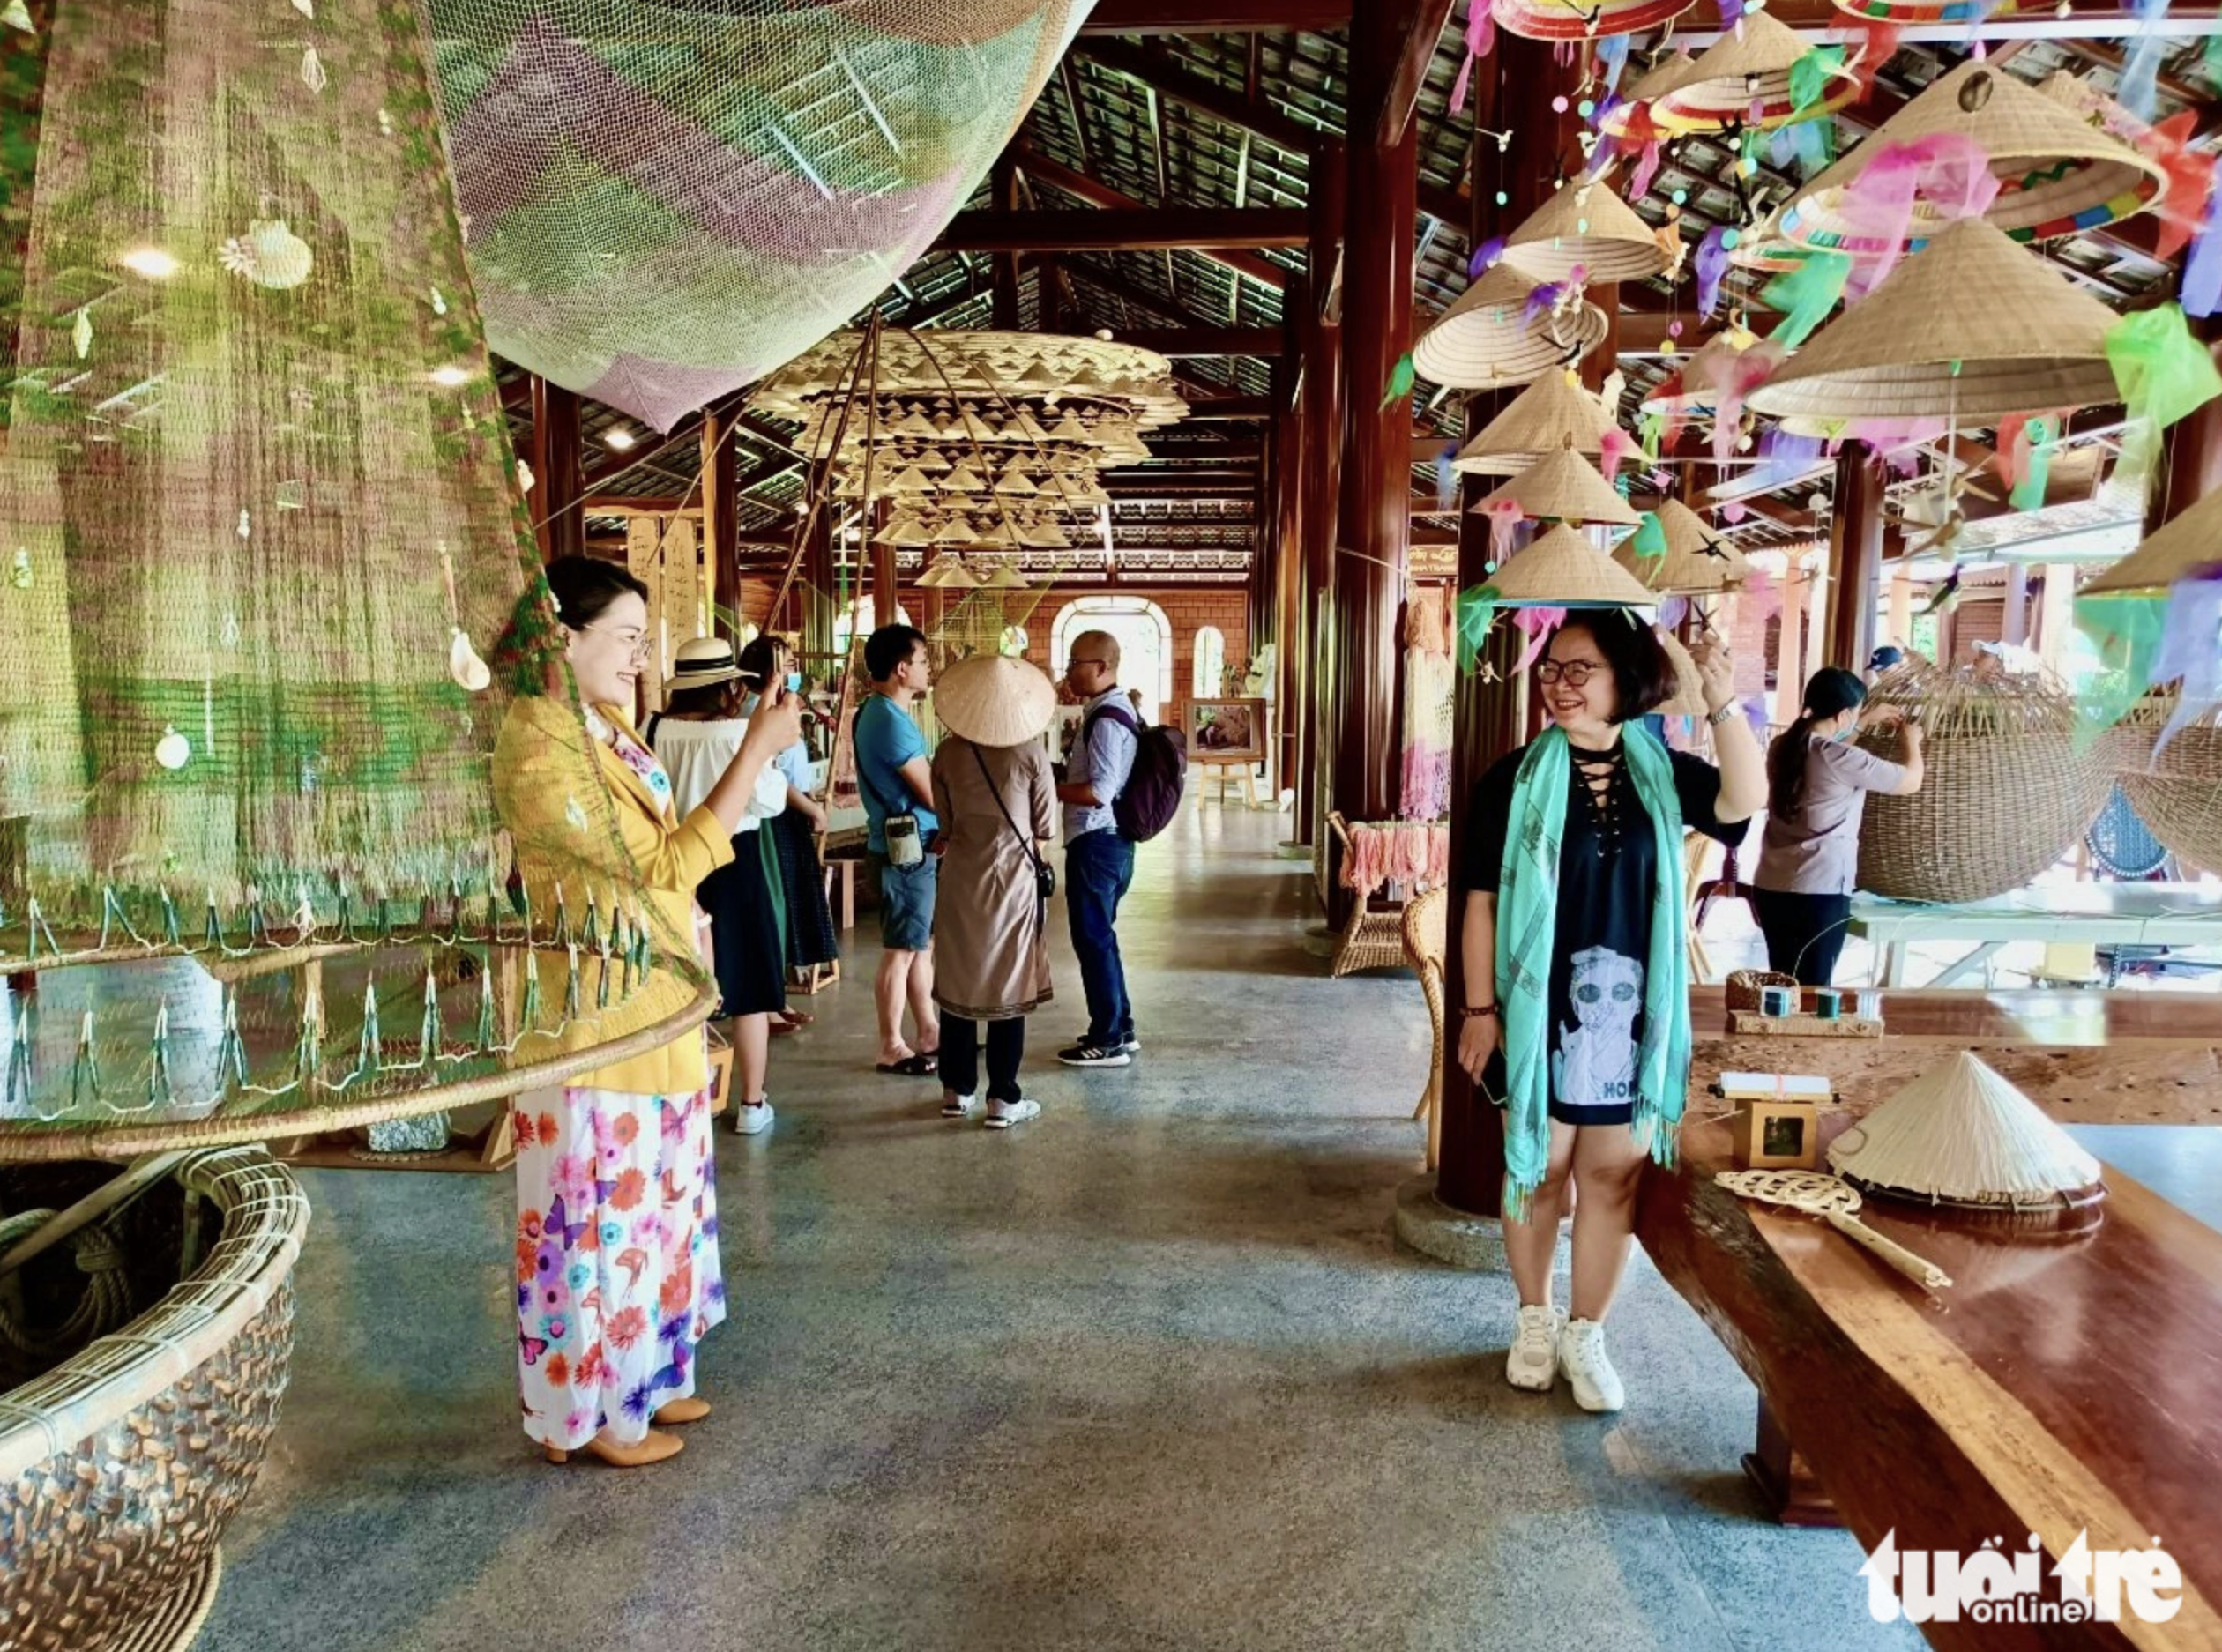 Tourists visit a traditional craft village festooned with decorations made of green materials in Khanh Hoa Province, south-central Vietnam. Photo: Minh Chien / Tuoi Tre